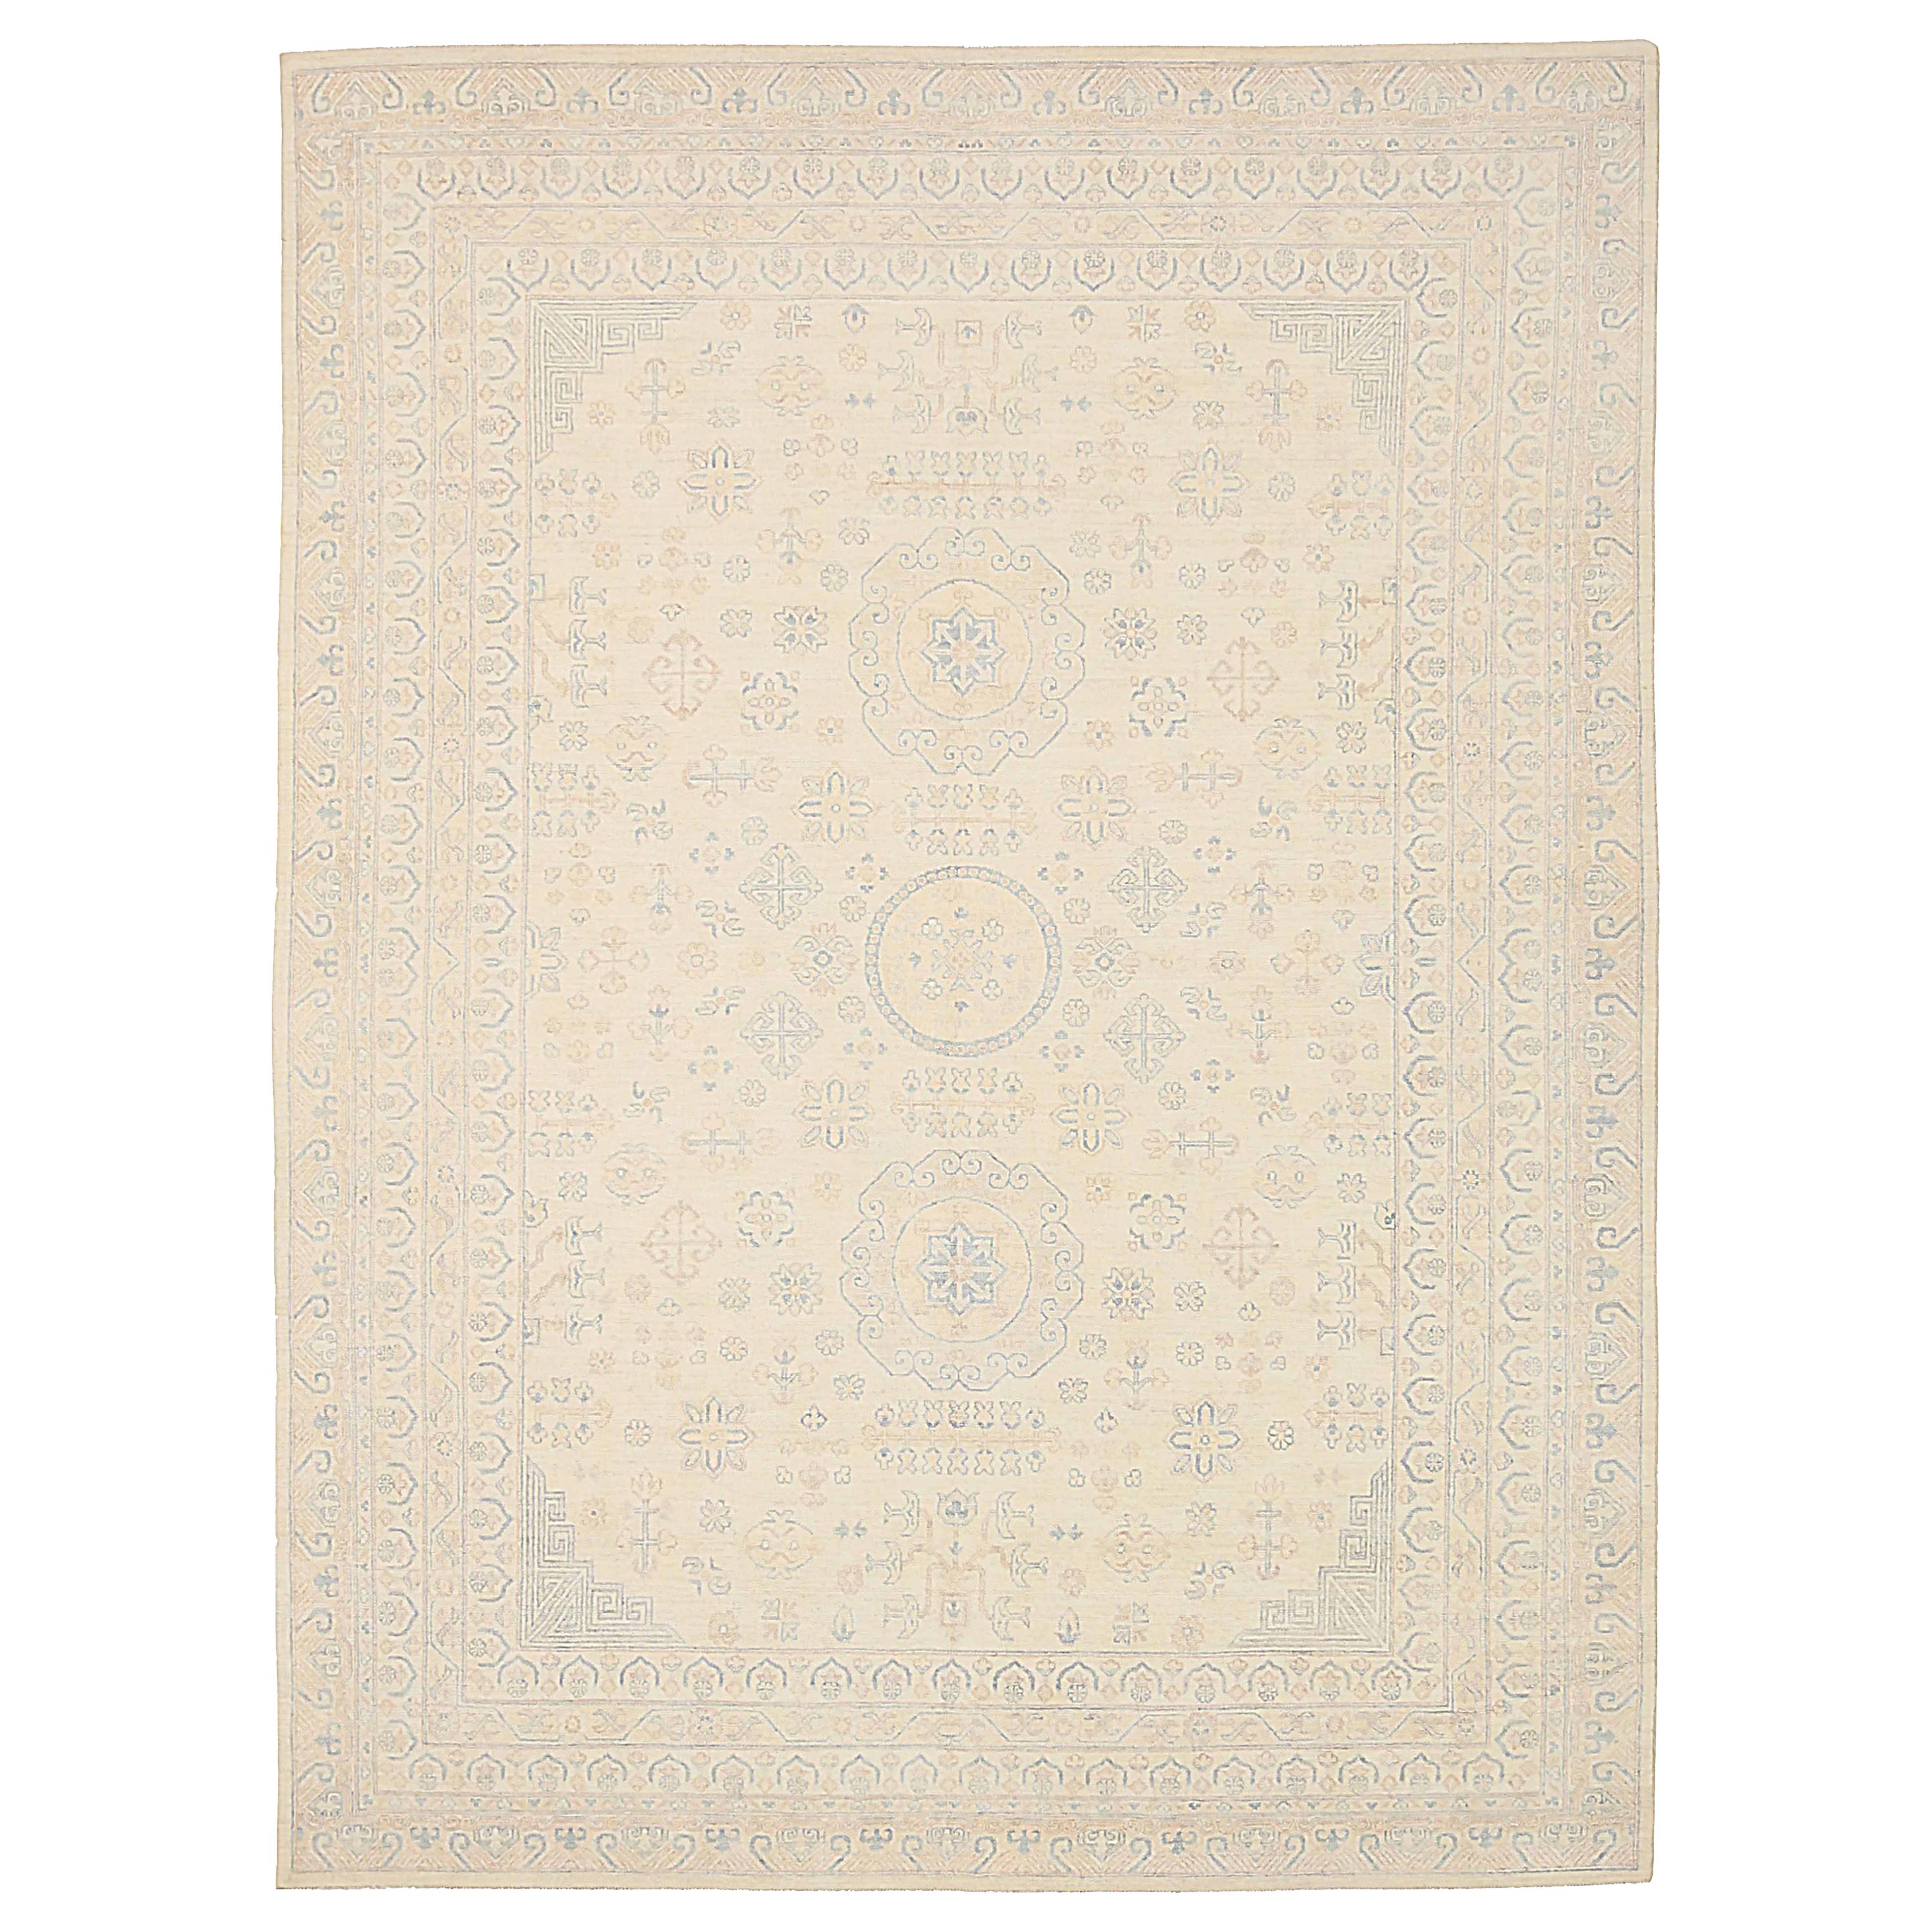 New Khotan Style Afghan Area Rug with '17th-Century' Look